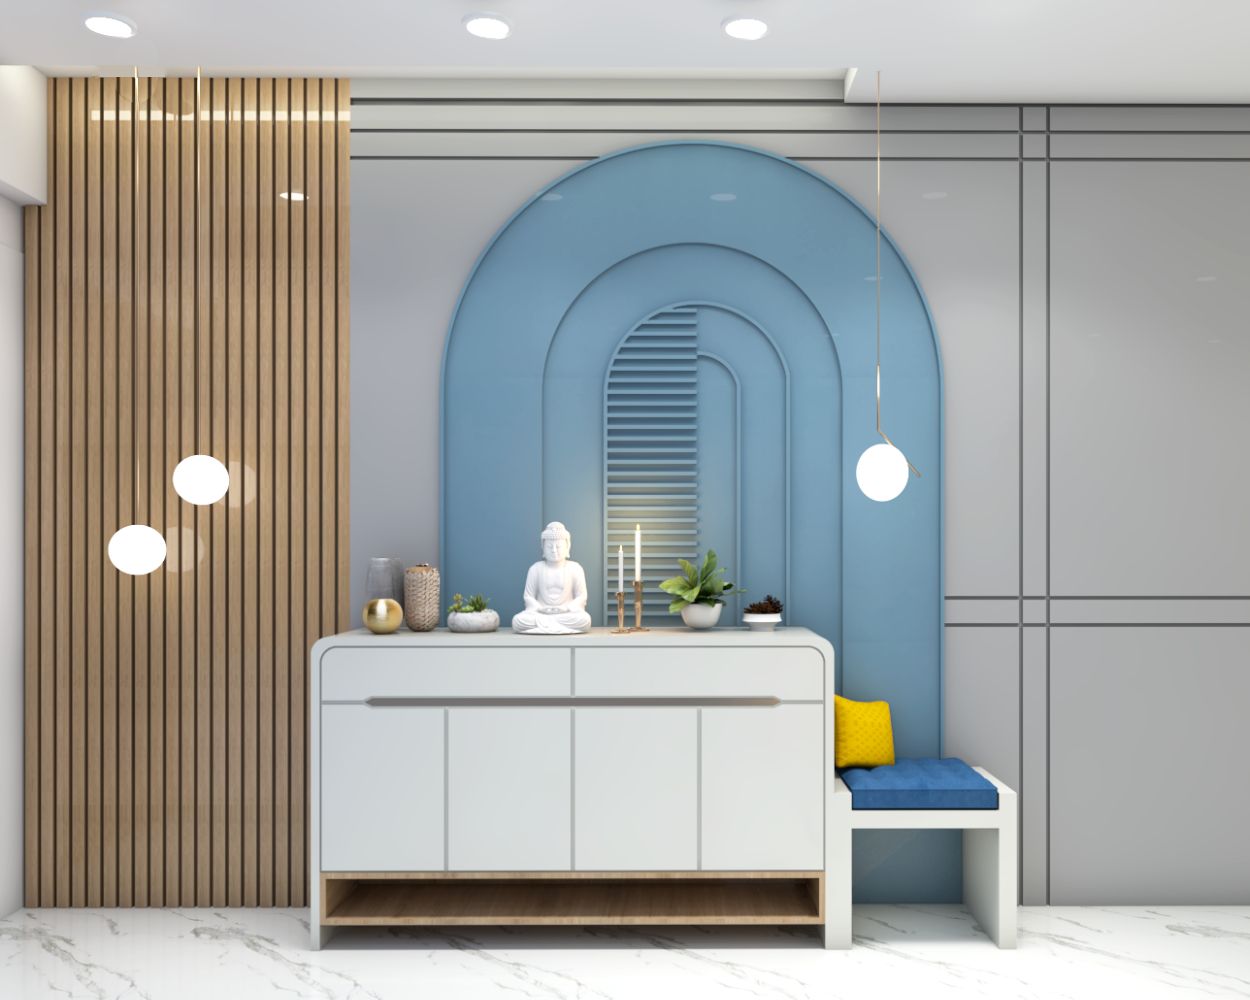 Art Deco Foyer Design With Blue Arched Wall And Wooden Wall Panels